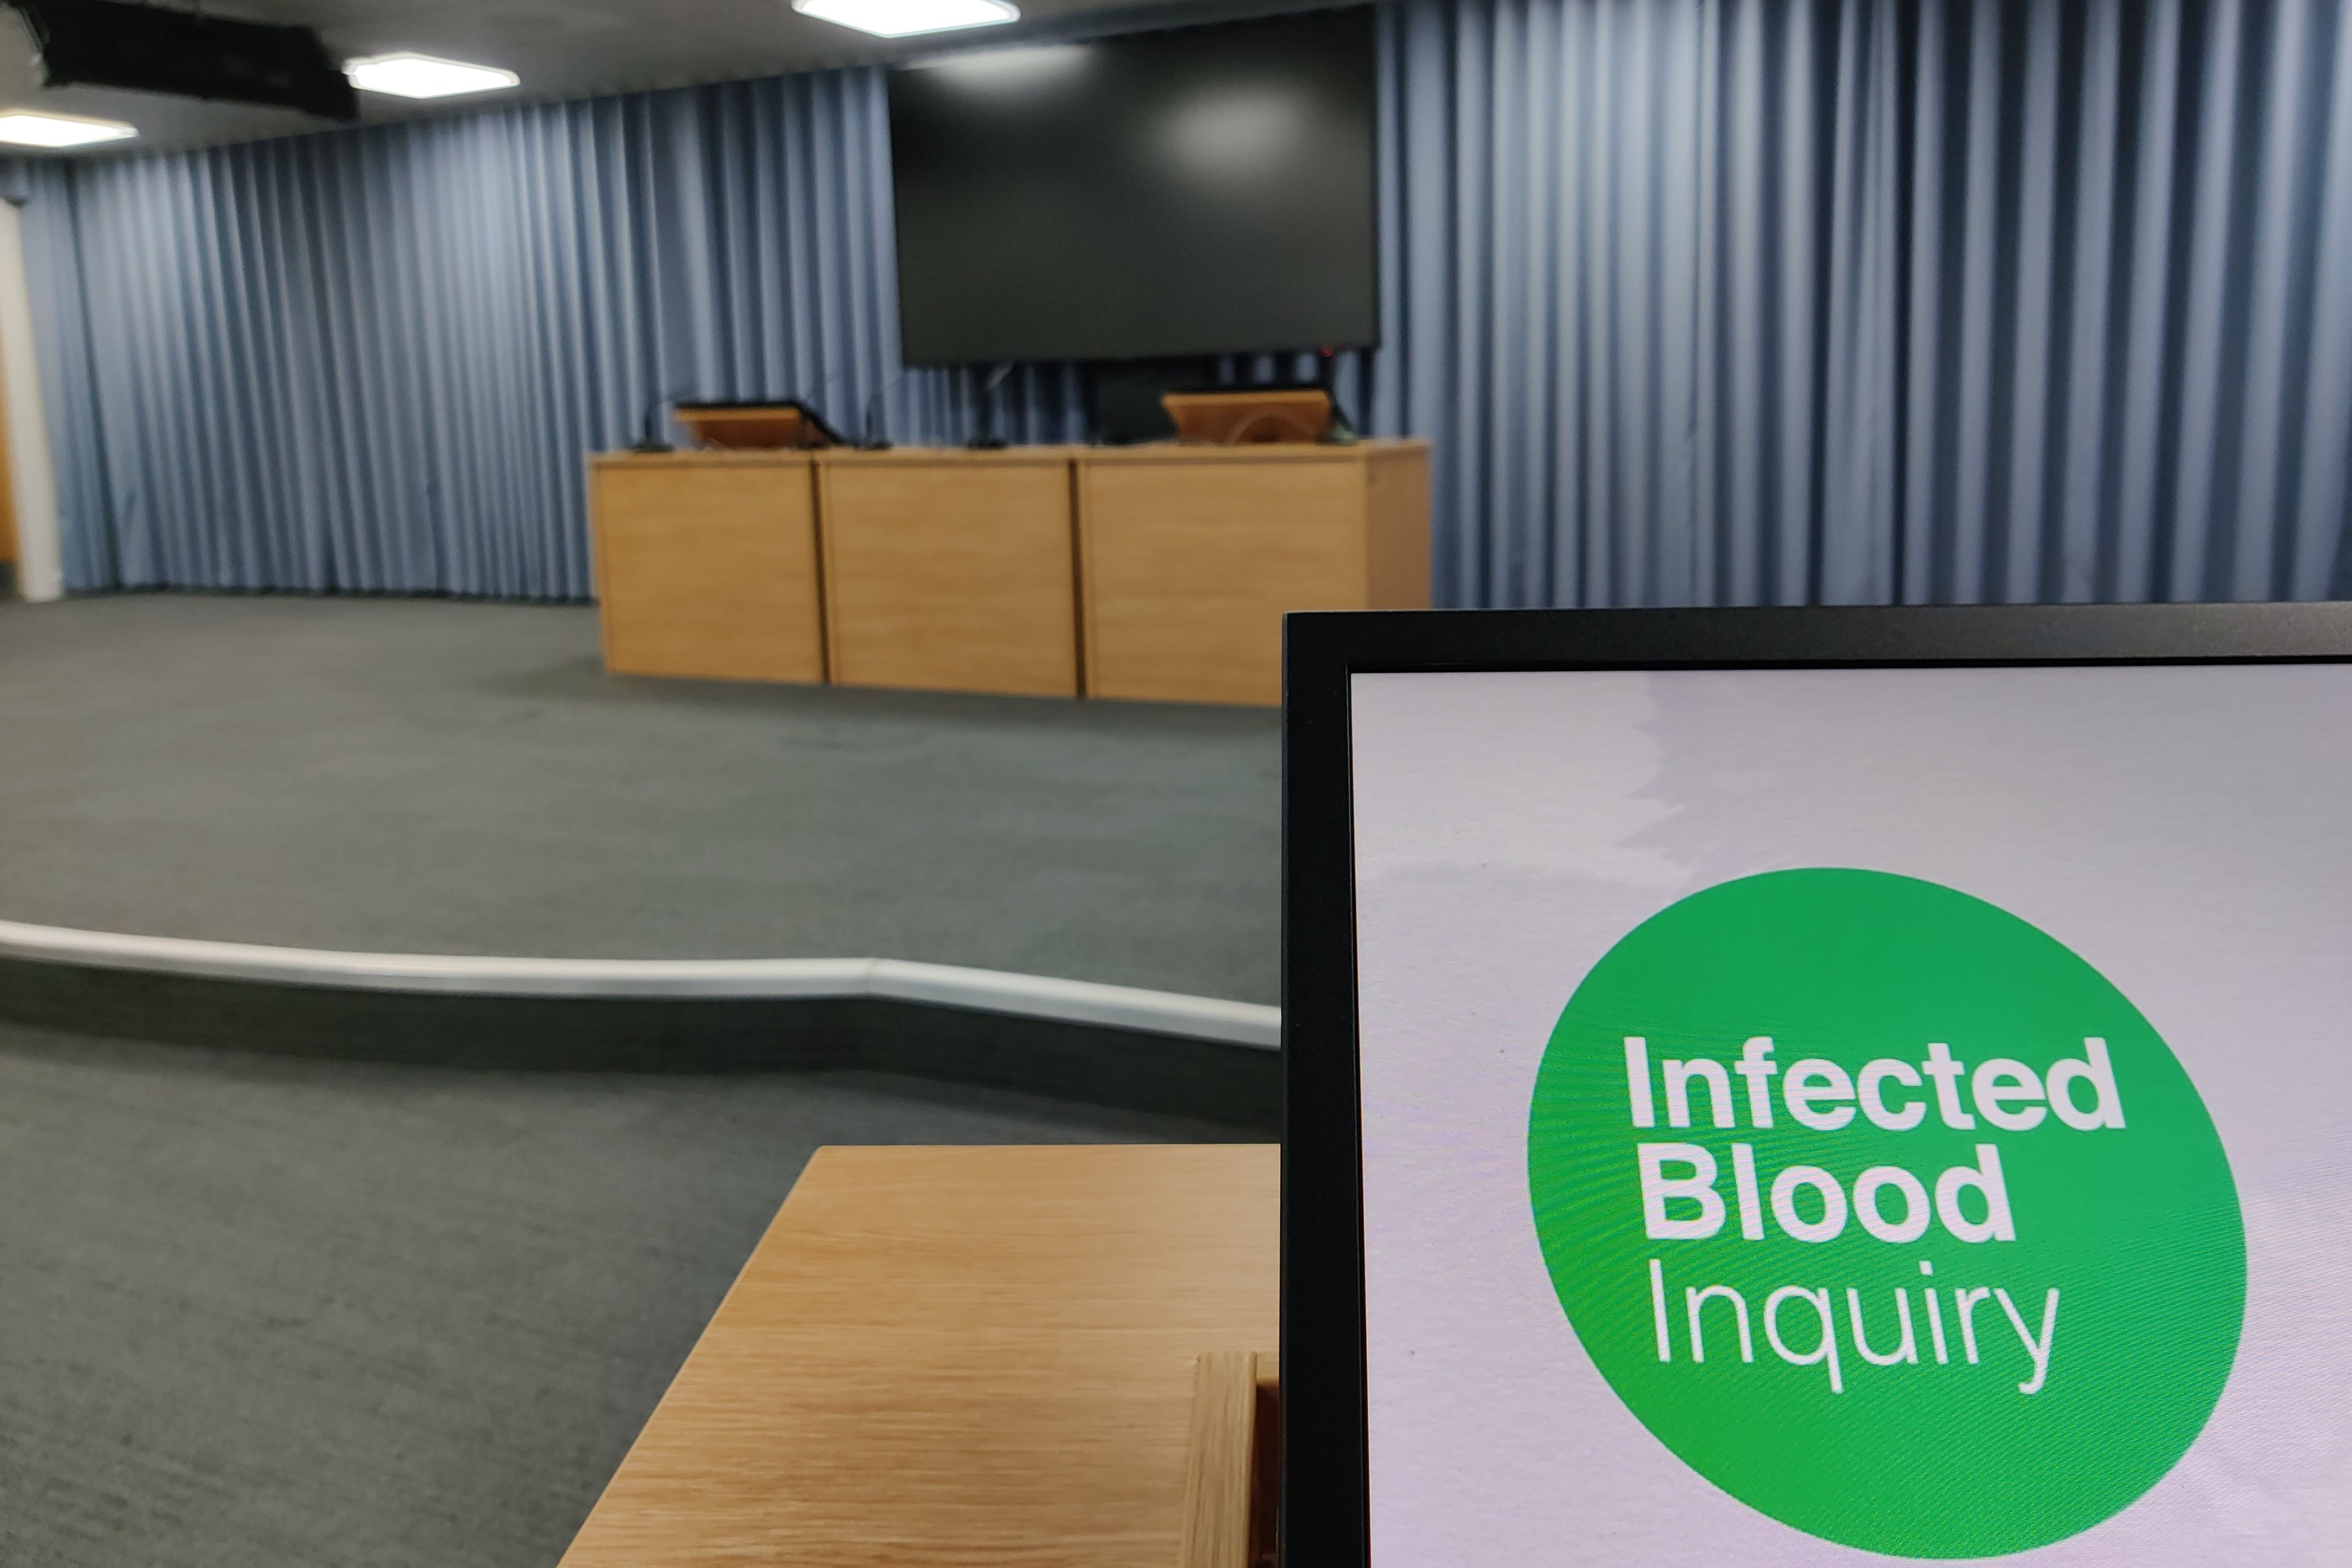 An independent inquiry into the infected blood scandal was releasing a second interim report on Wednesday (Infected Blood Inquiry/PA)